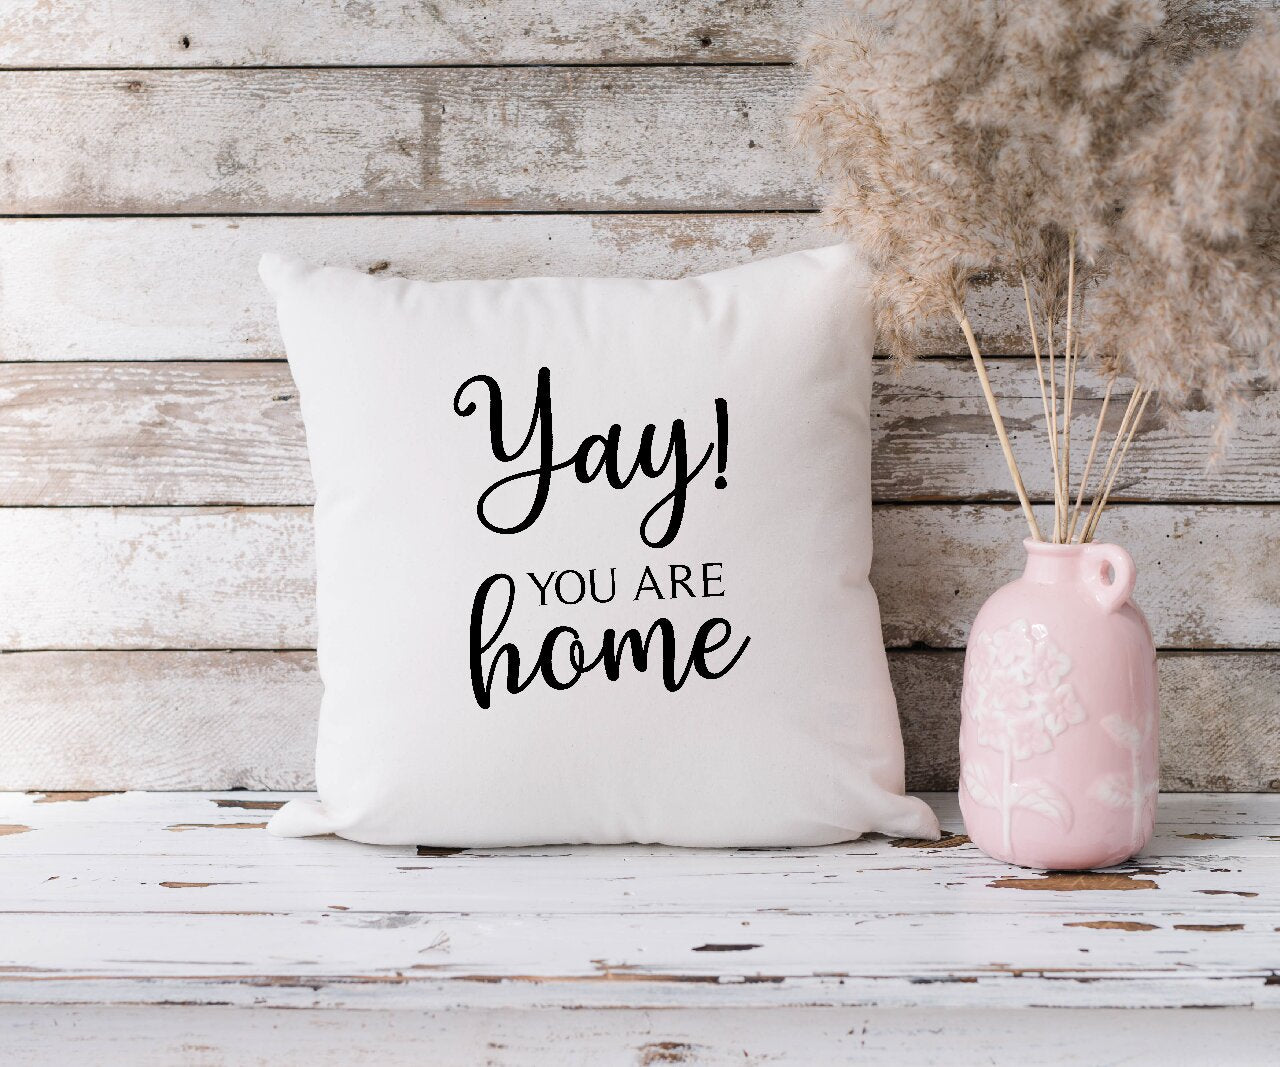 Yay! You Are Home - Cushion Cover